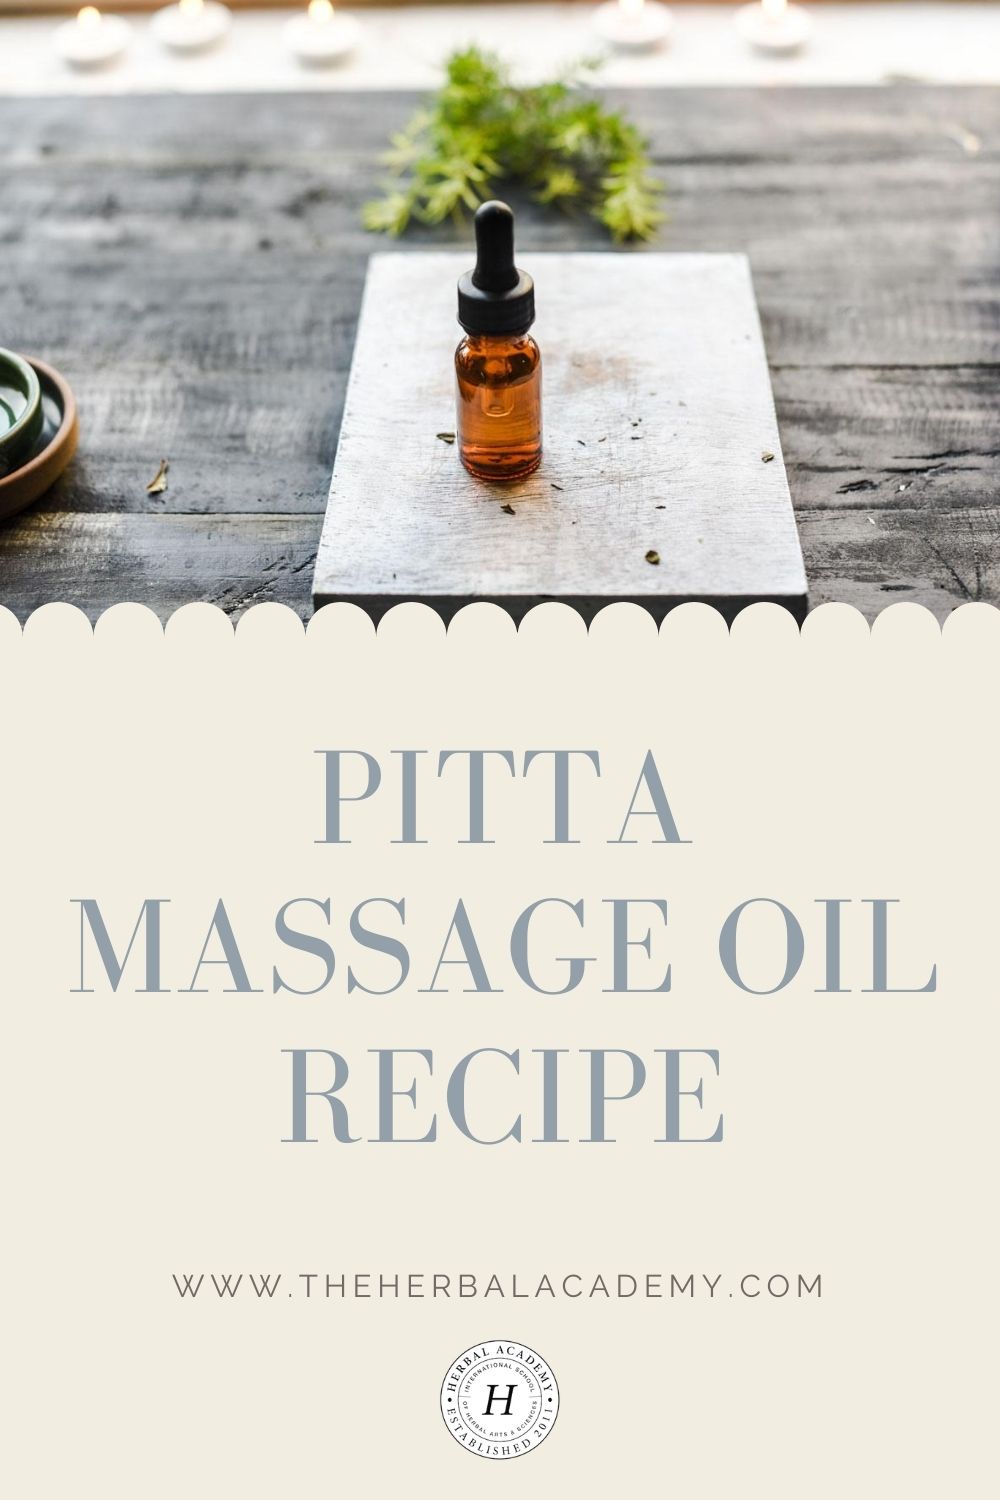 Pitta Massage Oil Recipe (Summer and Late Spring) | Herbal Academy | This pitta massage oil recipe is great for summer and late spring because it uses herbs with a cooling energy.